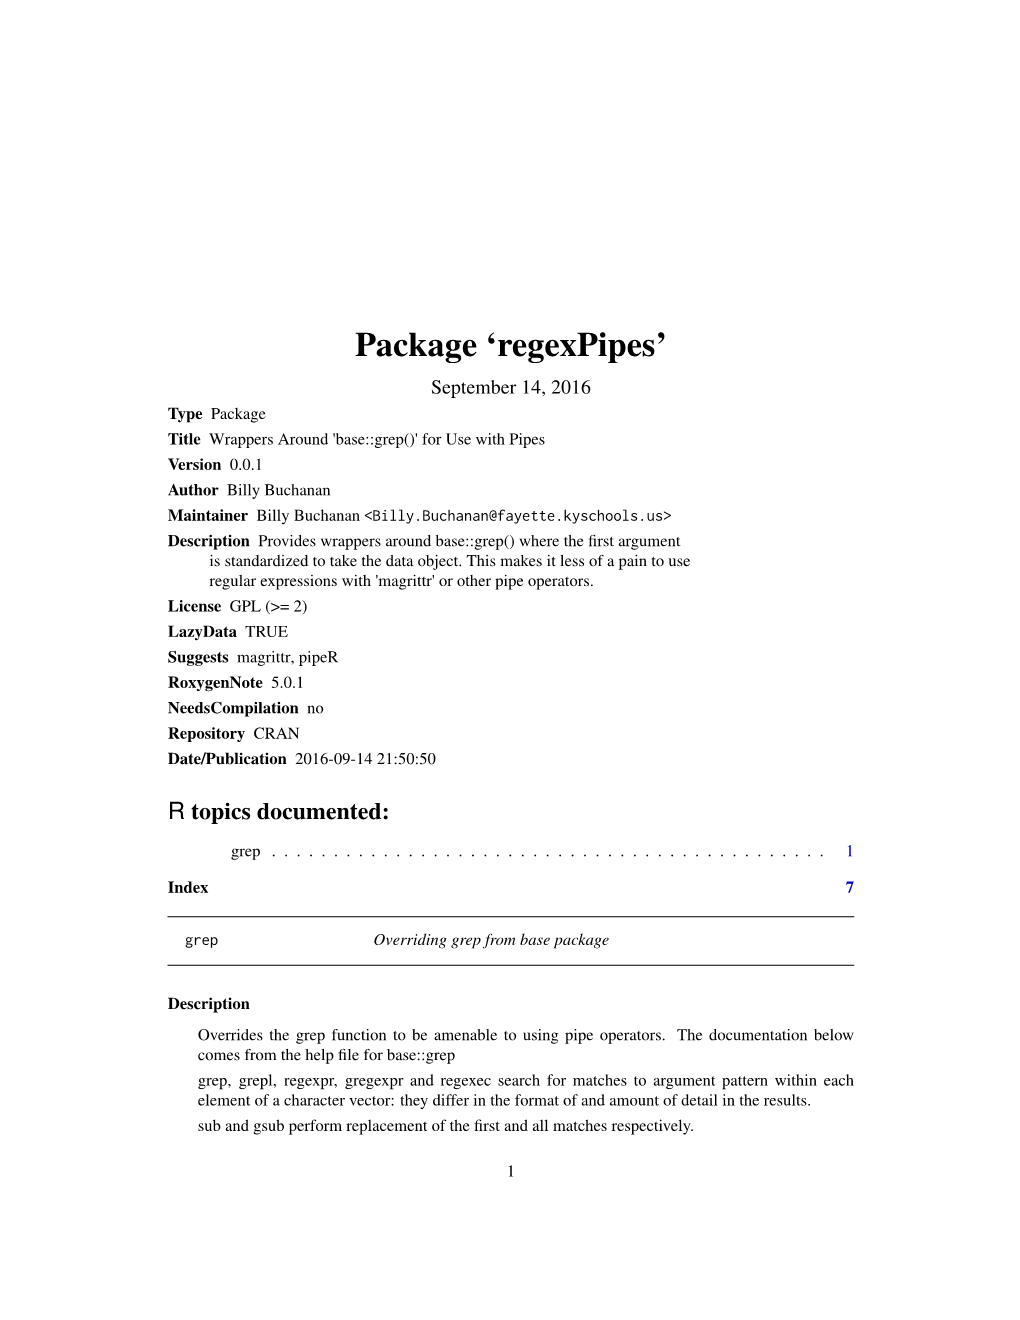 Package 'Regexpipes'